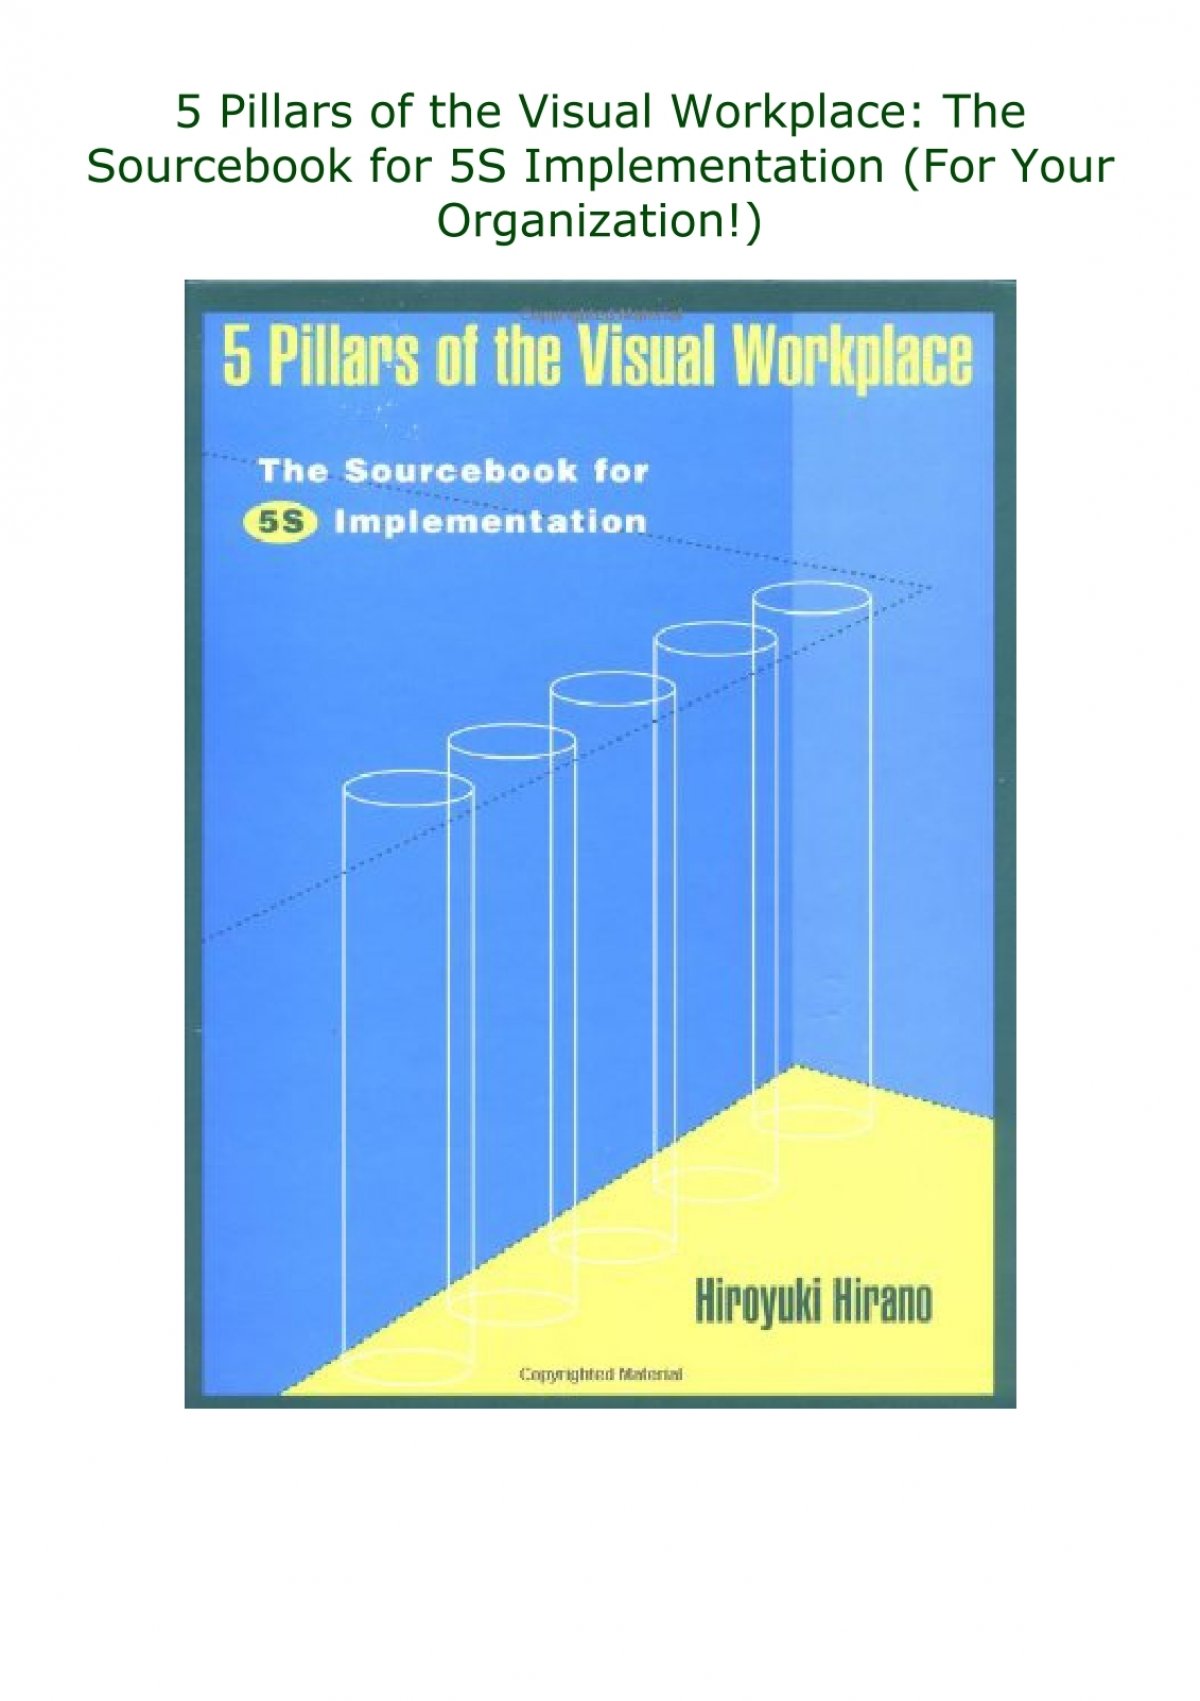 ([PDF> 5 Pillars of the Visual Workplace: The Sourcebook for 5S ...